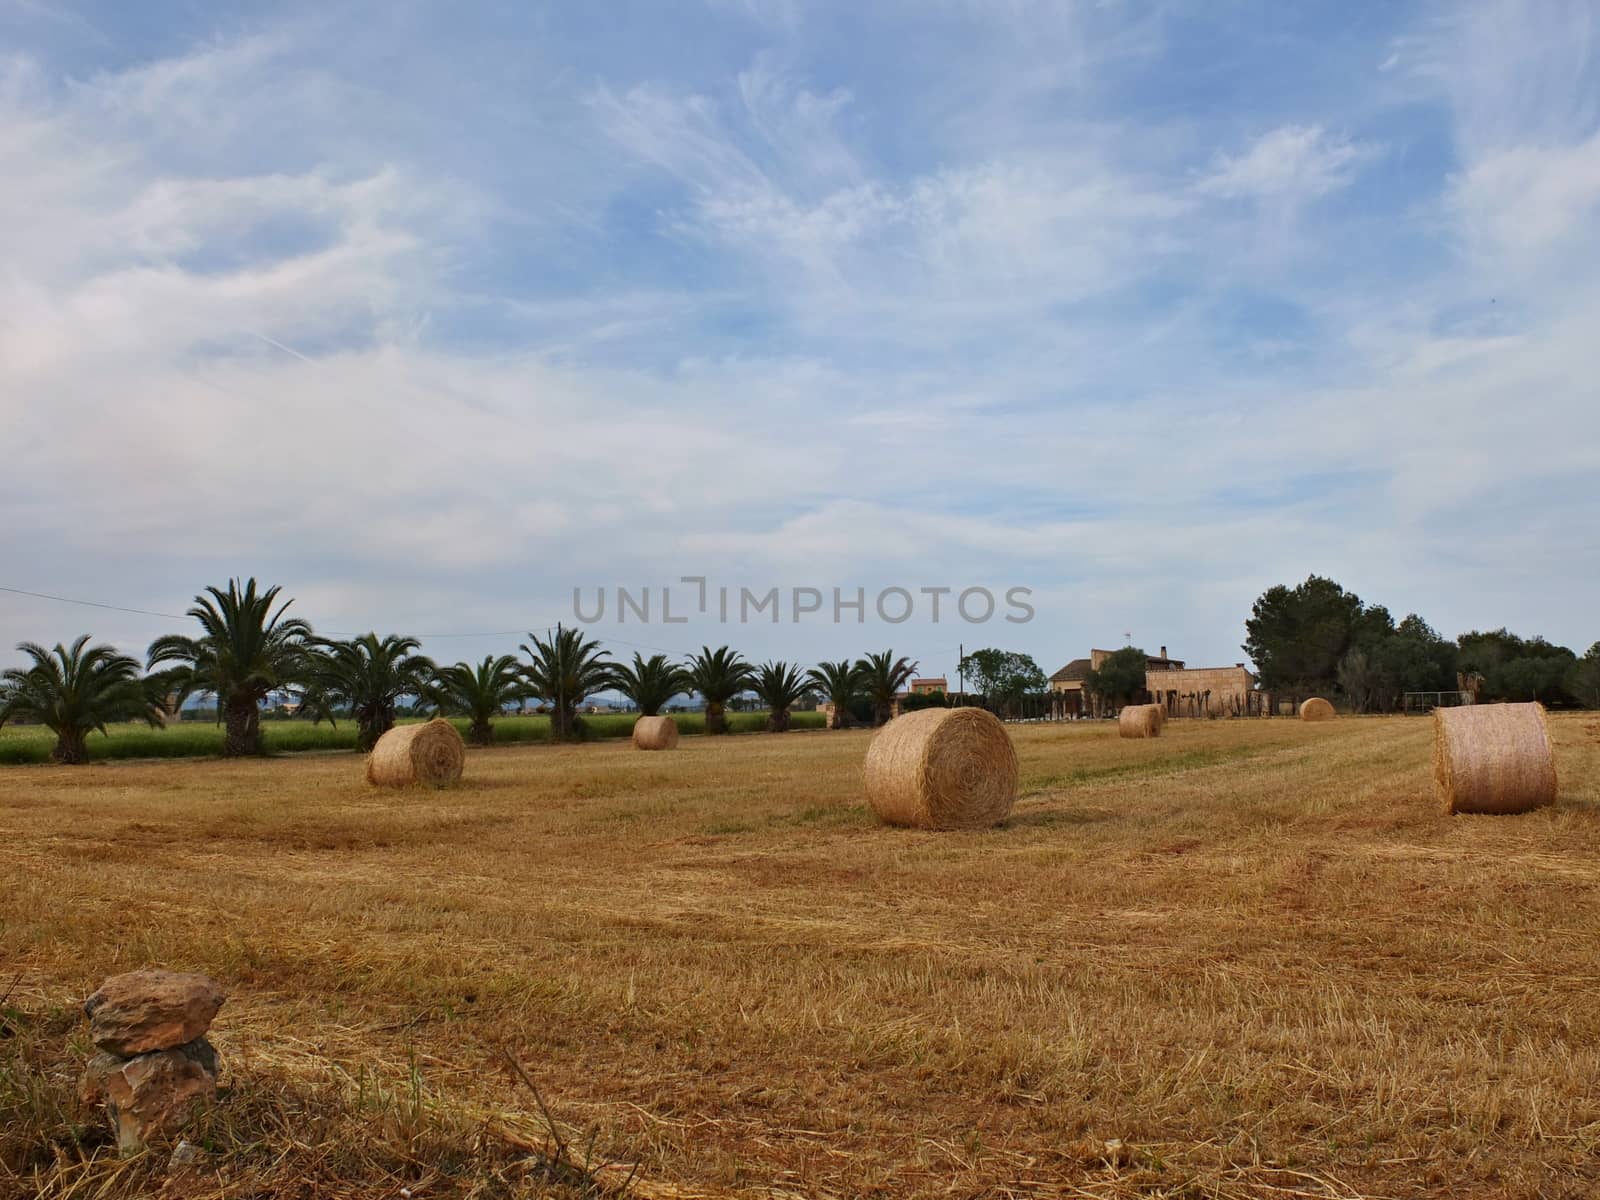 Bales of straw on the field with palms in behind